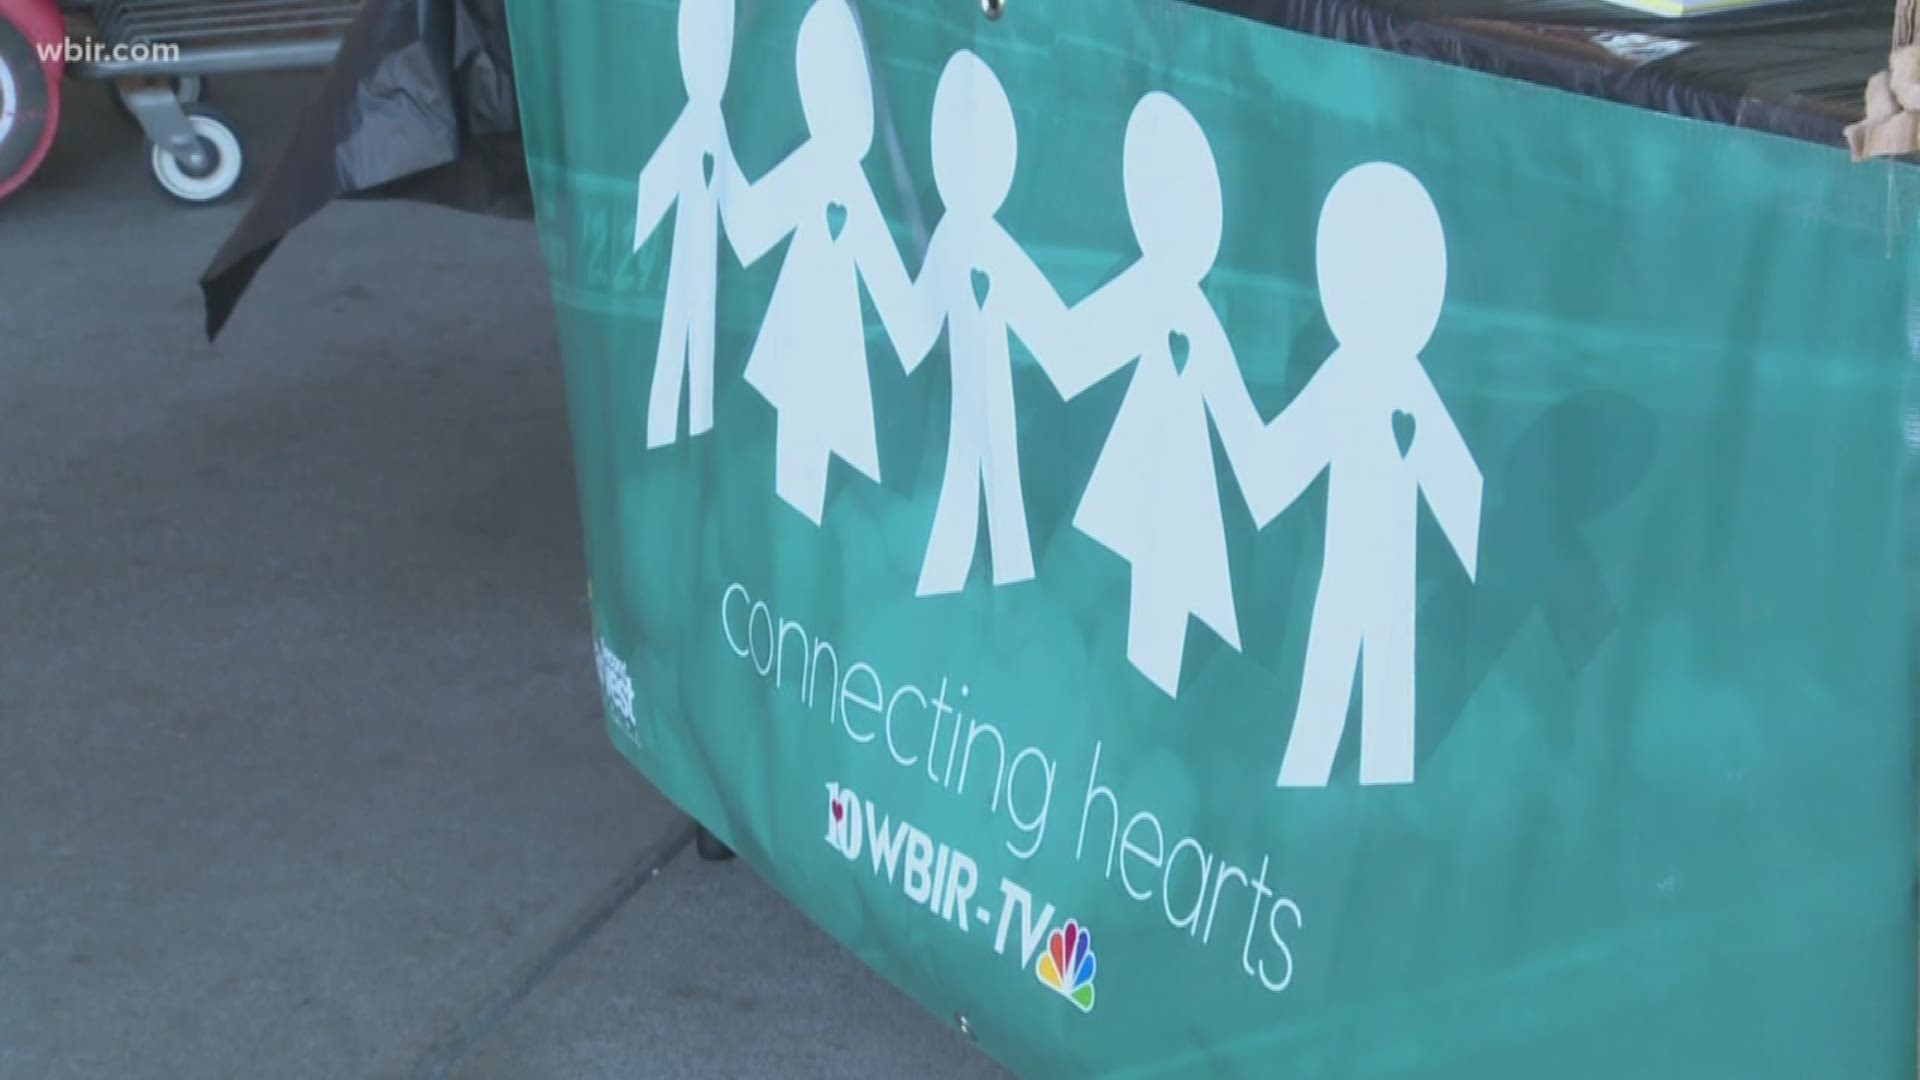 The WBIR Connecting Hearts program provides local homebound seniors with food and companionship.